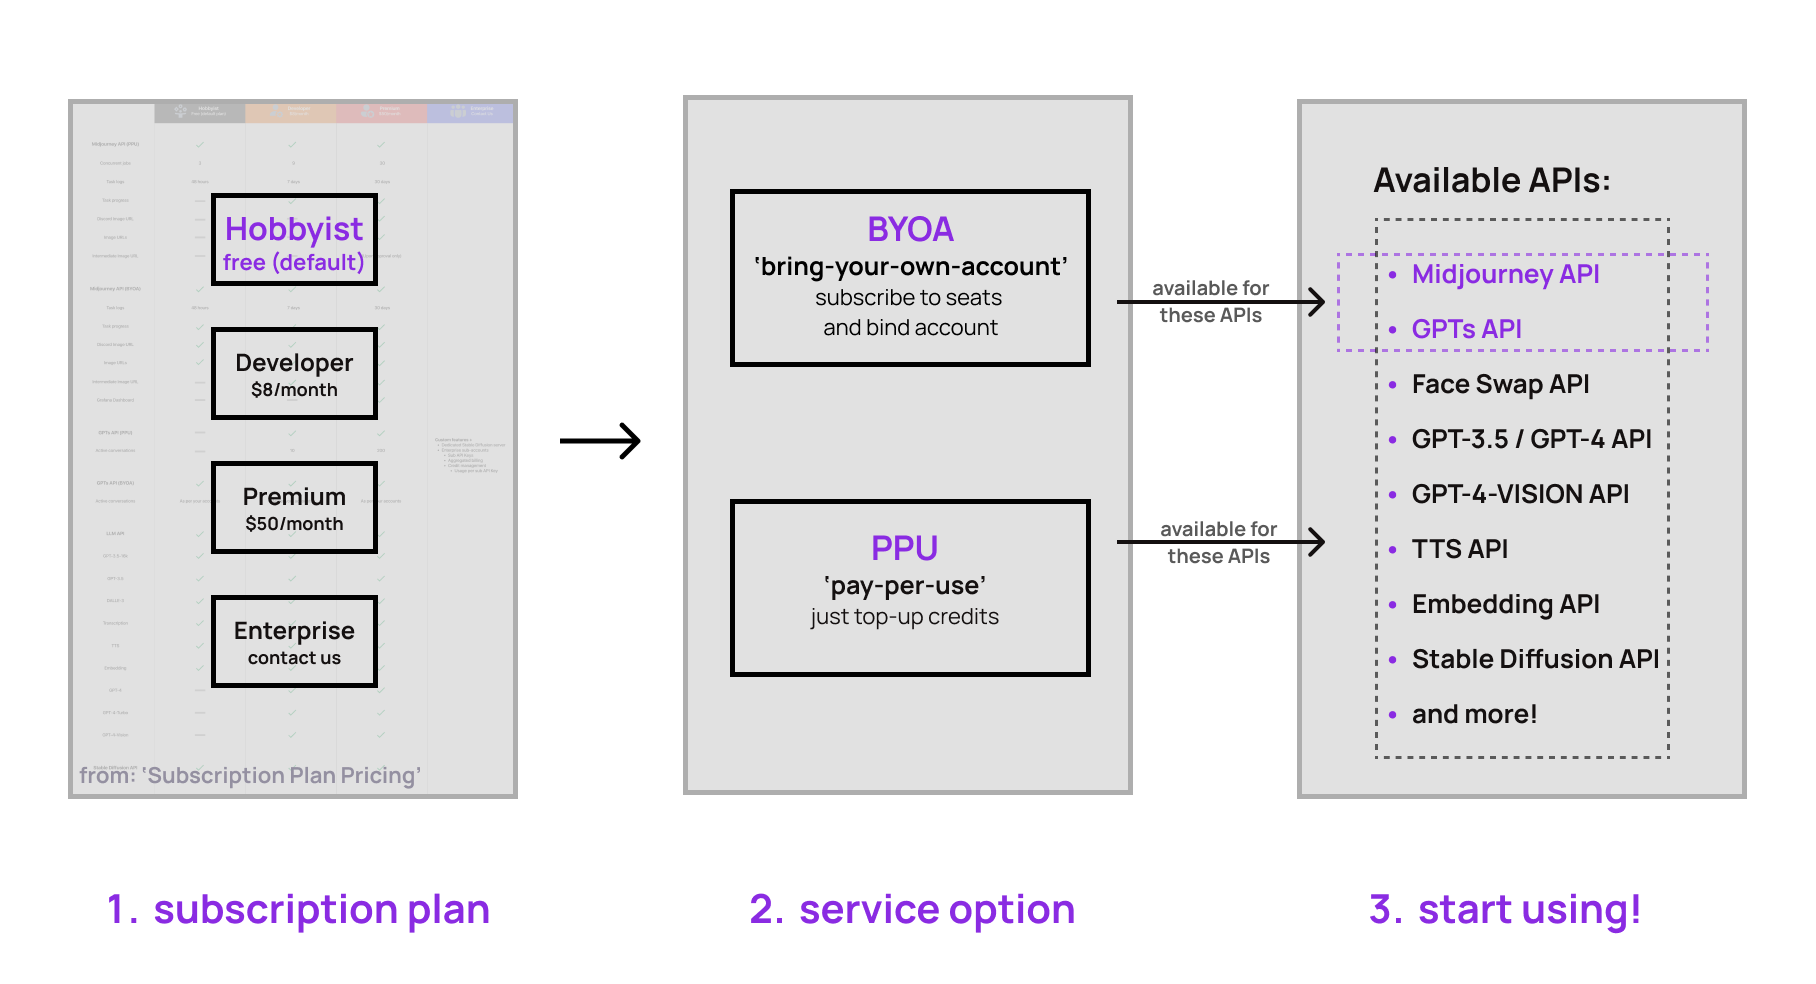 a workflow chart showing users will have a subscription plan first, and then they will choose the service option, and then they can use the APIs